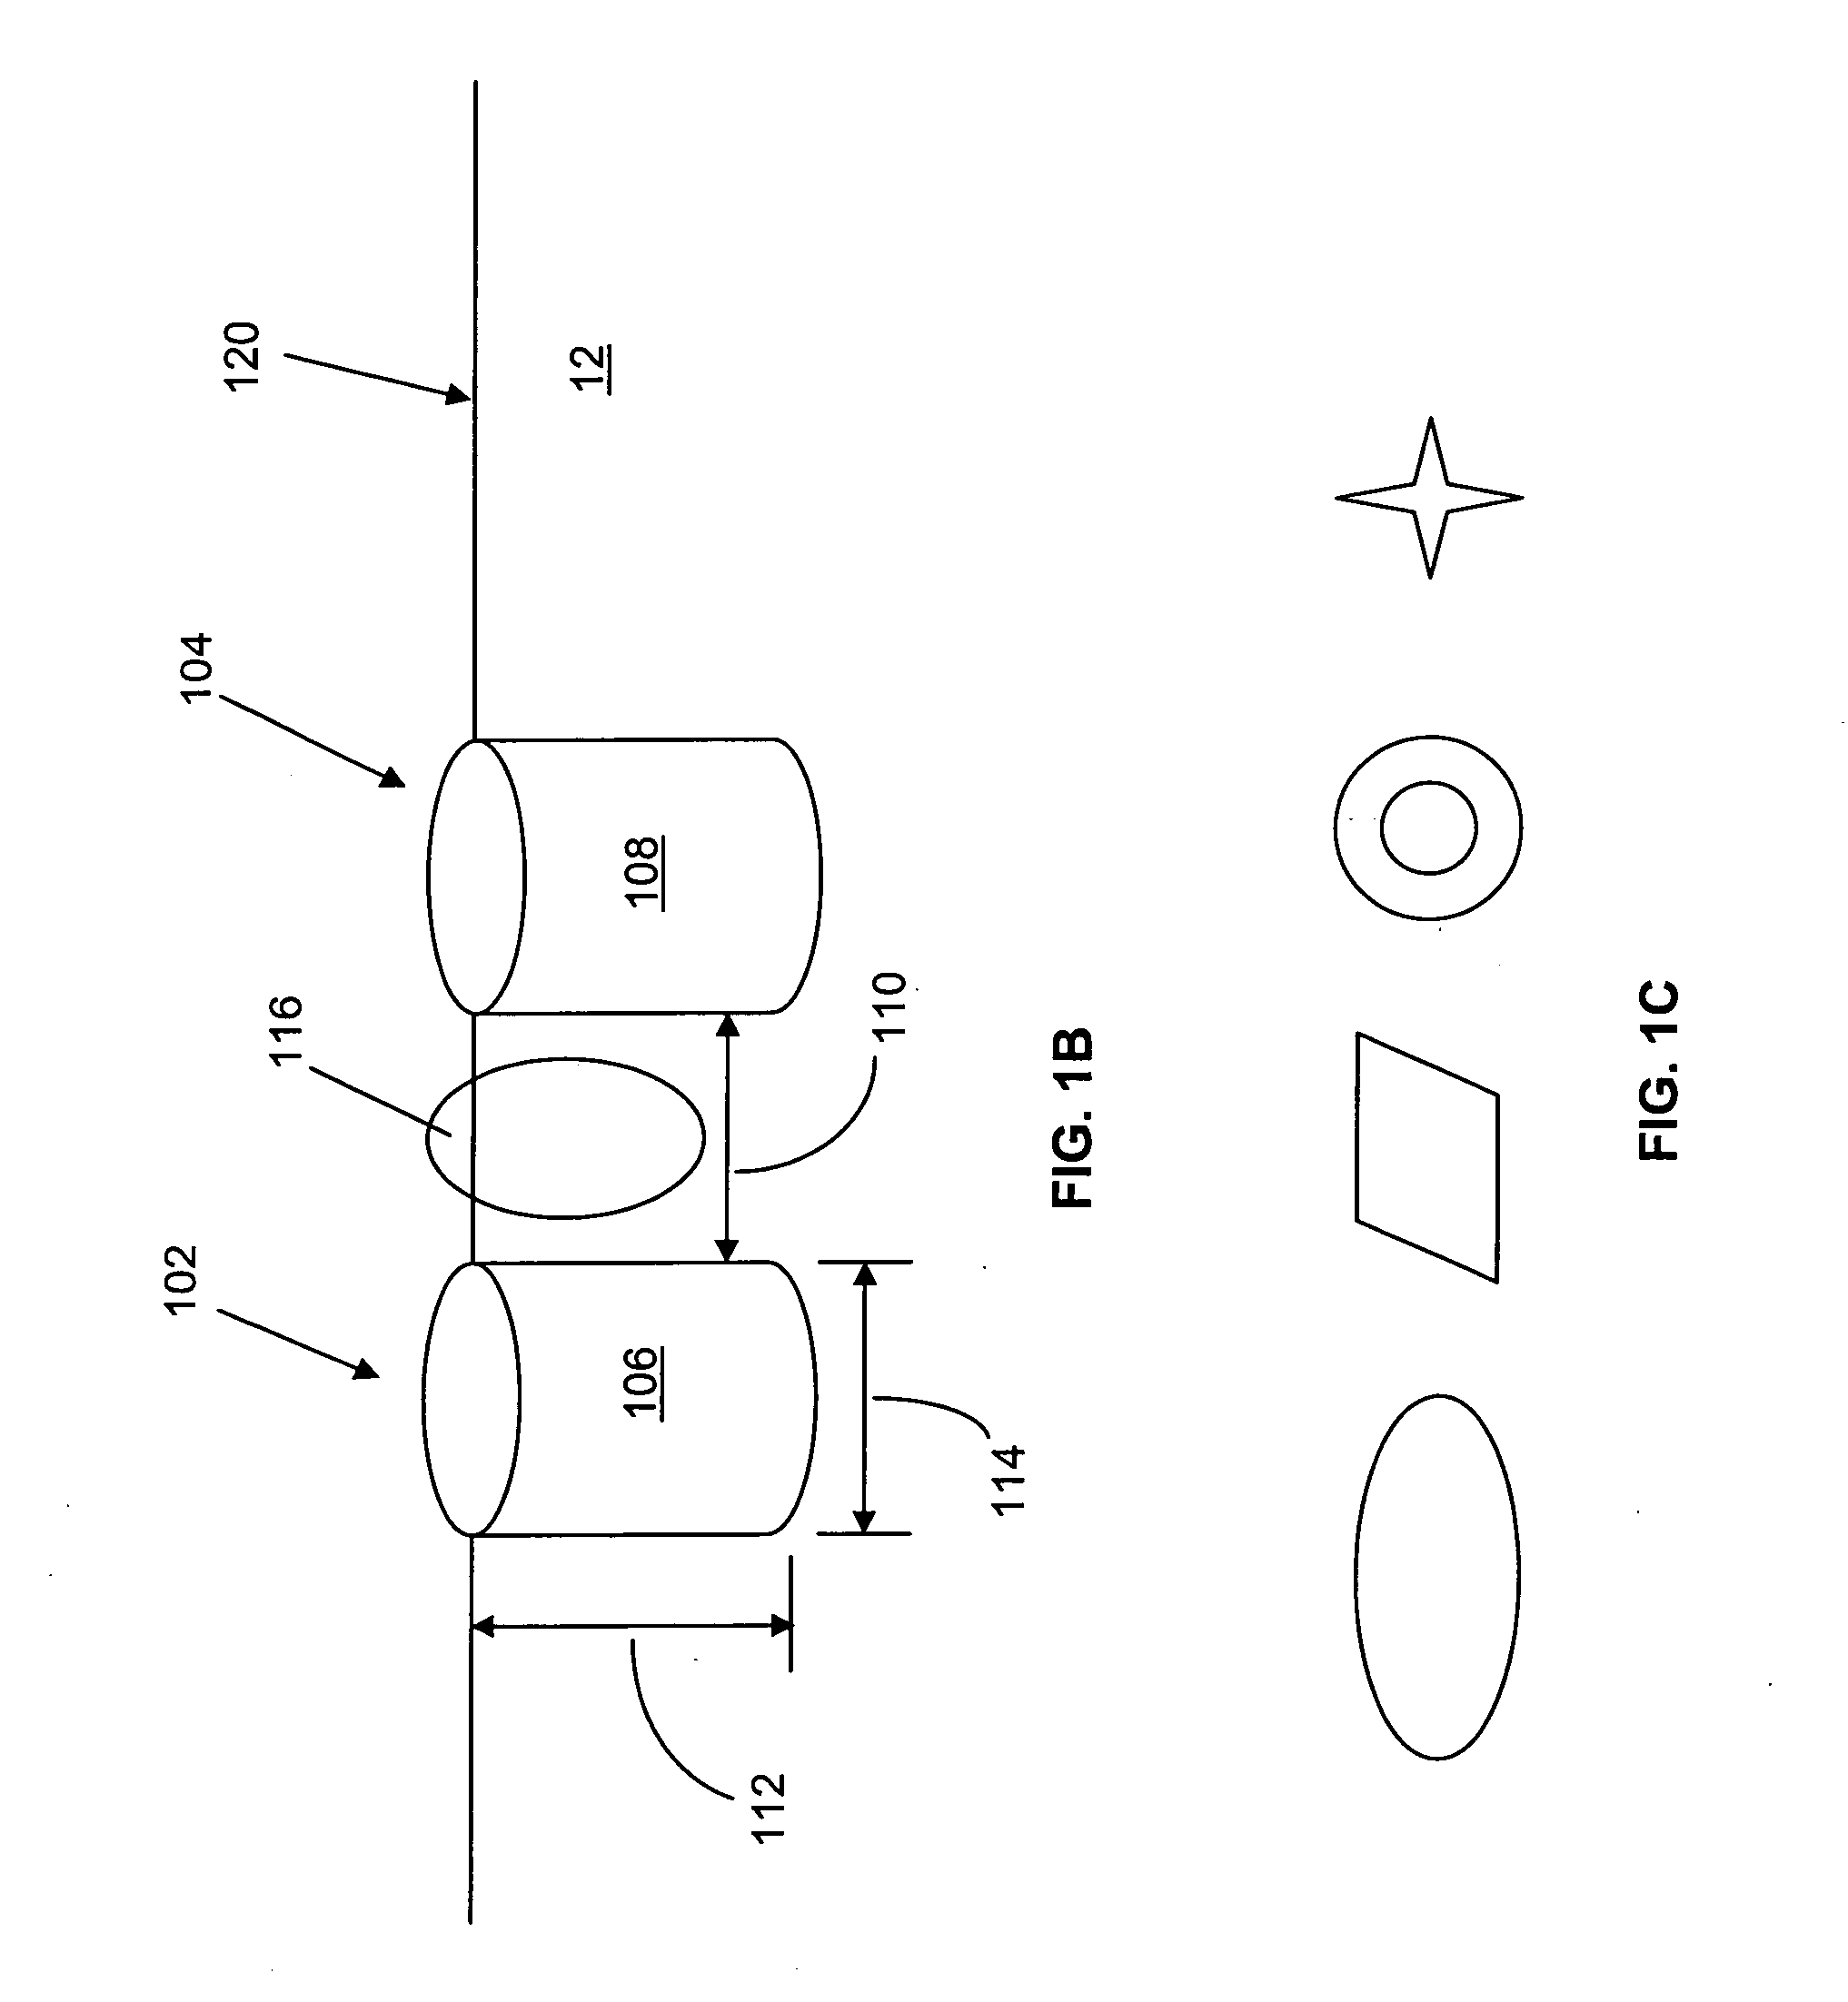 Apparatus and method to treat heart disease using lasers to form microchannels